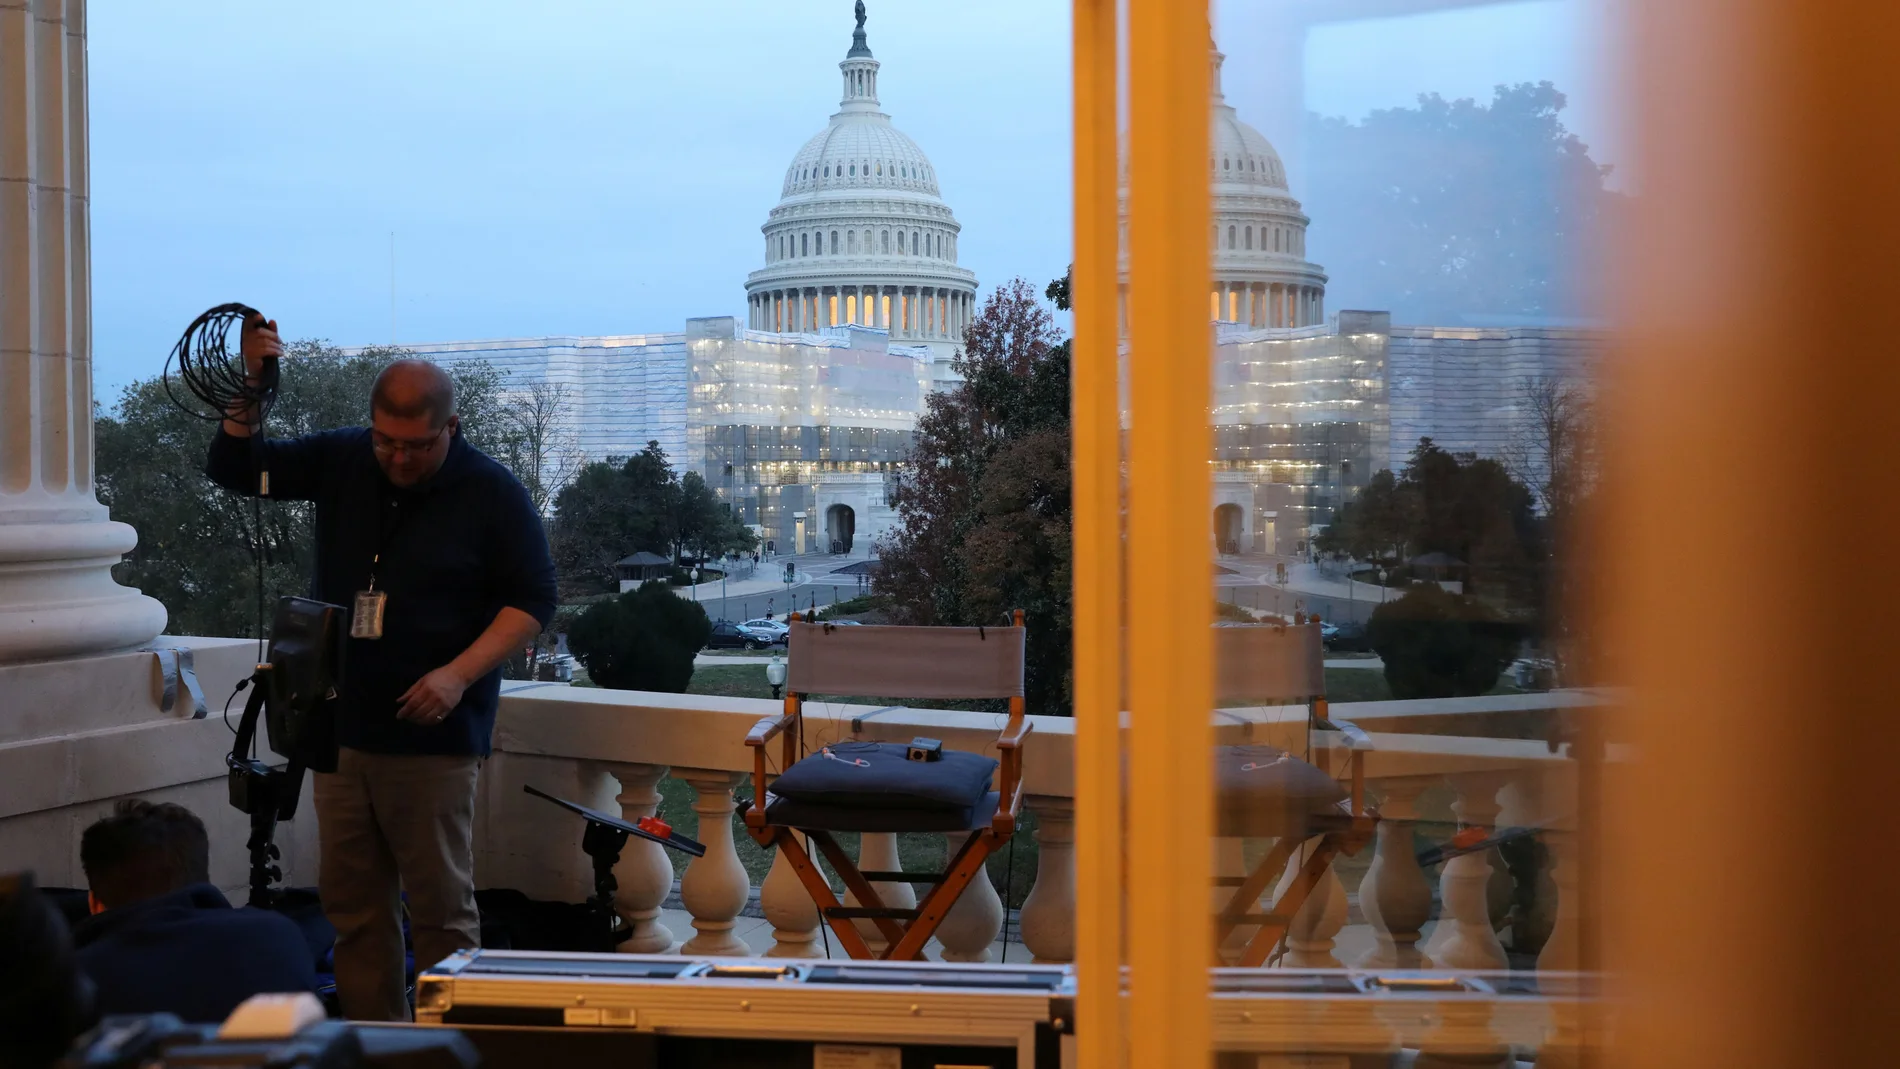 Television news crews work in the early morning hours ahead of testimony by former U.S. ambassador to Ukraine Yovanovitch before a House Intelligence Committee hearing as part of the Trump impeachment inquiry on Capitol Hill in Washington